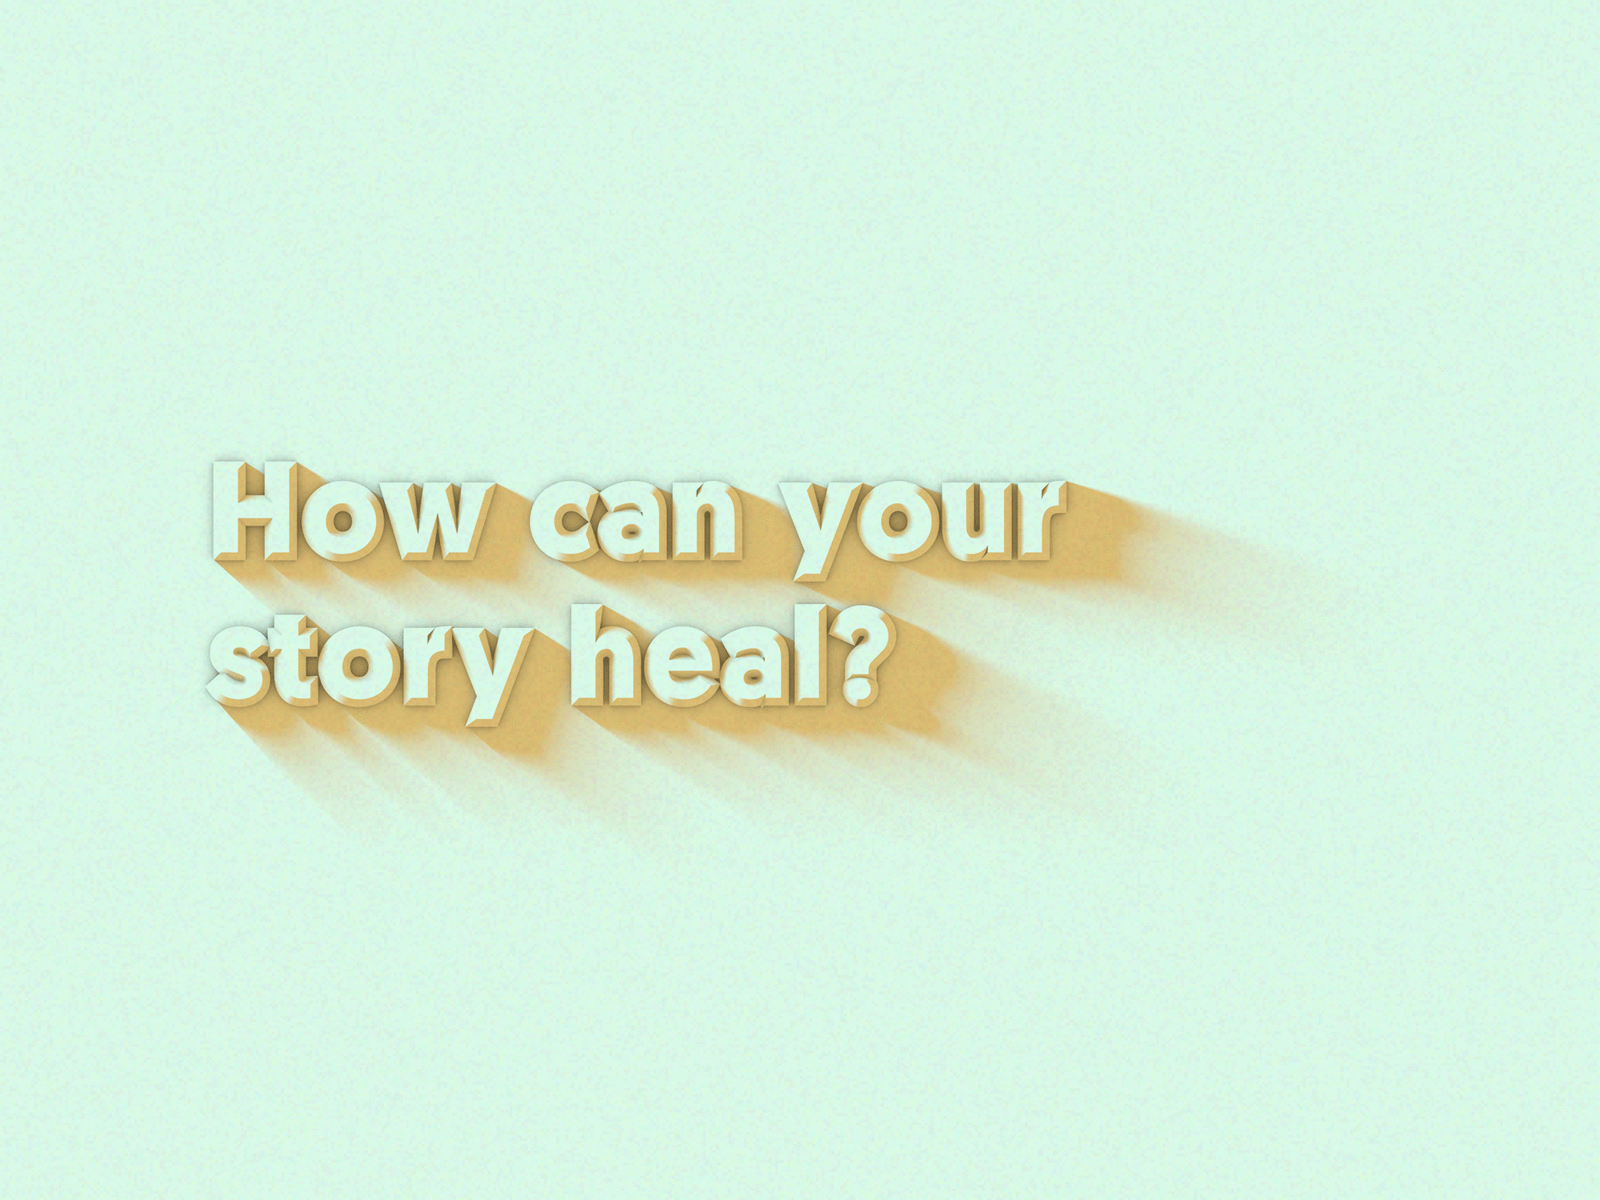 How can your story heal?